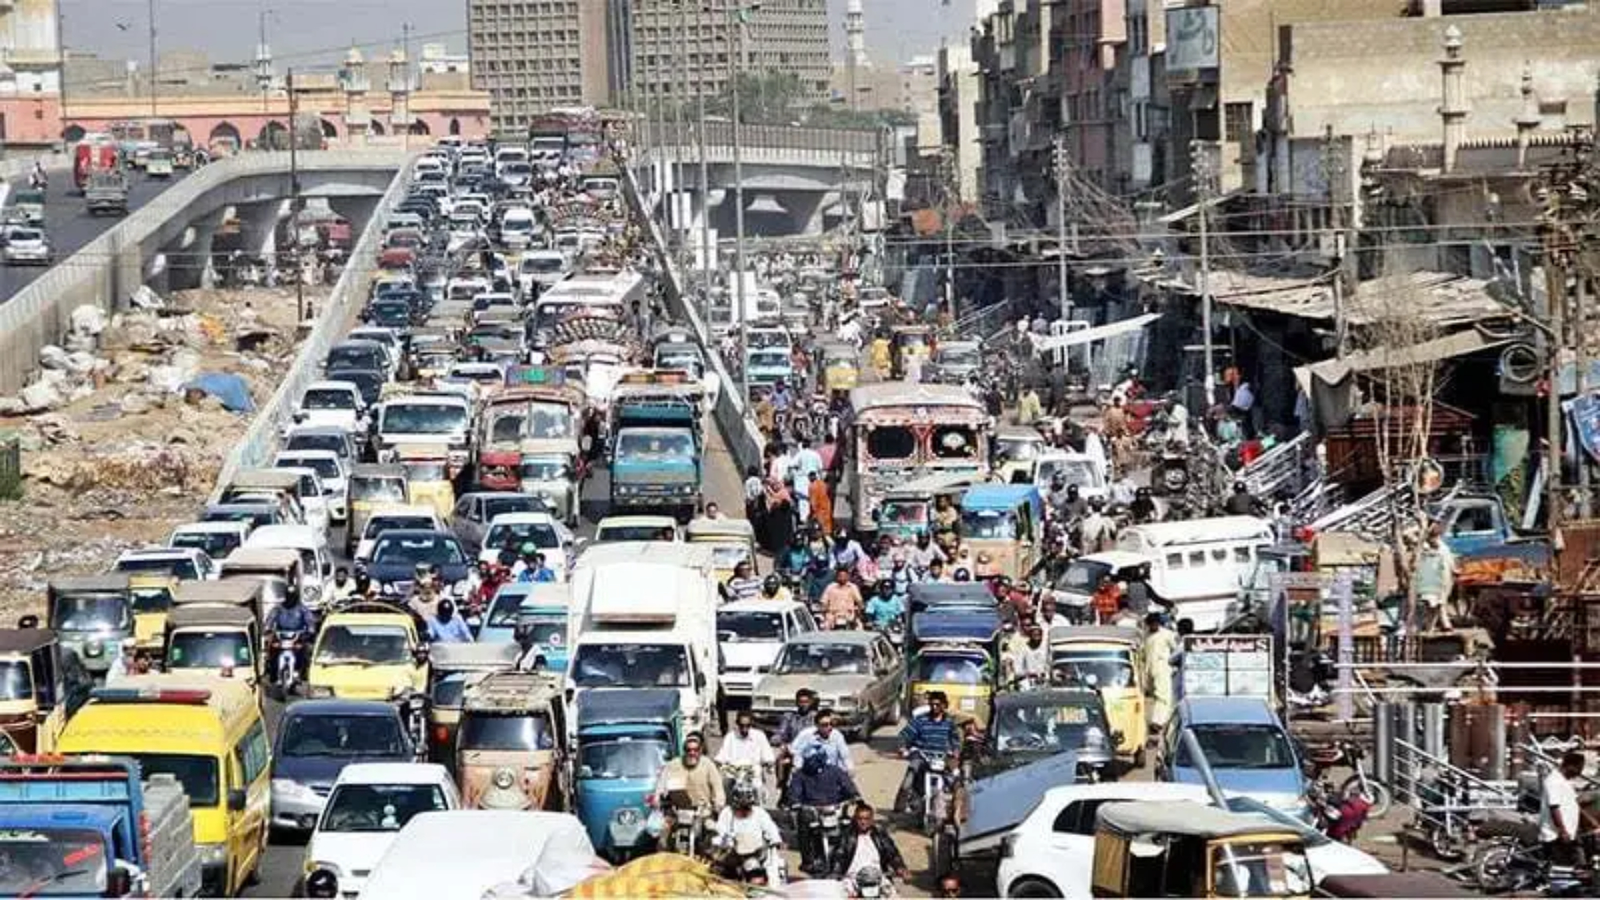 Karachi ranked as least liveable city in global survey